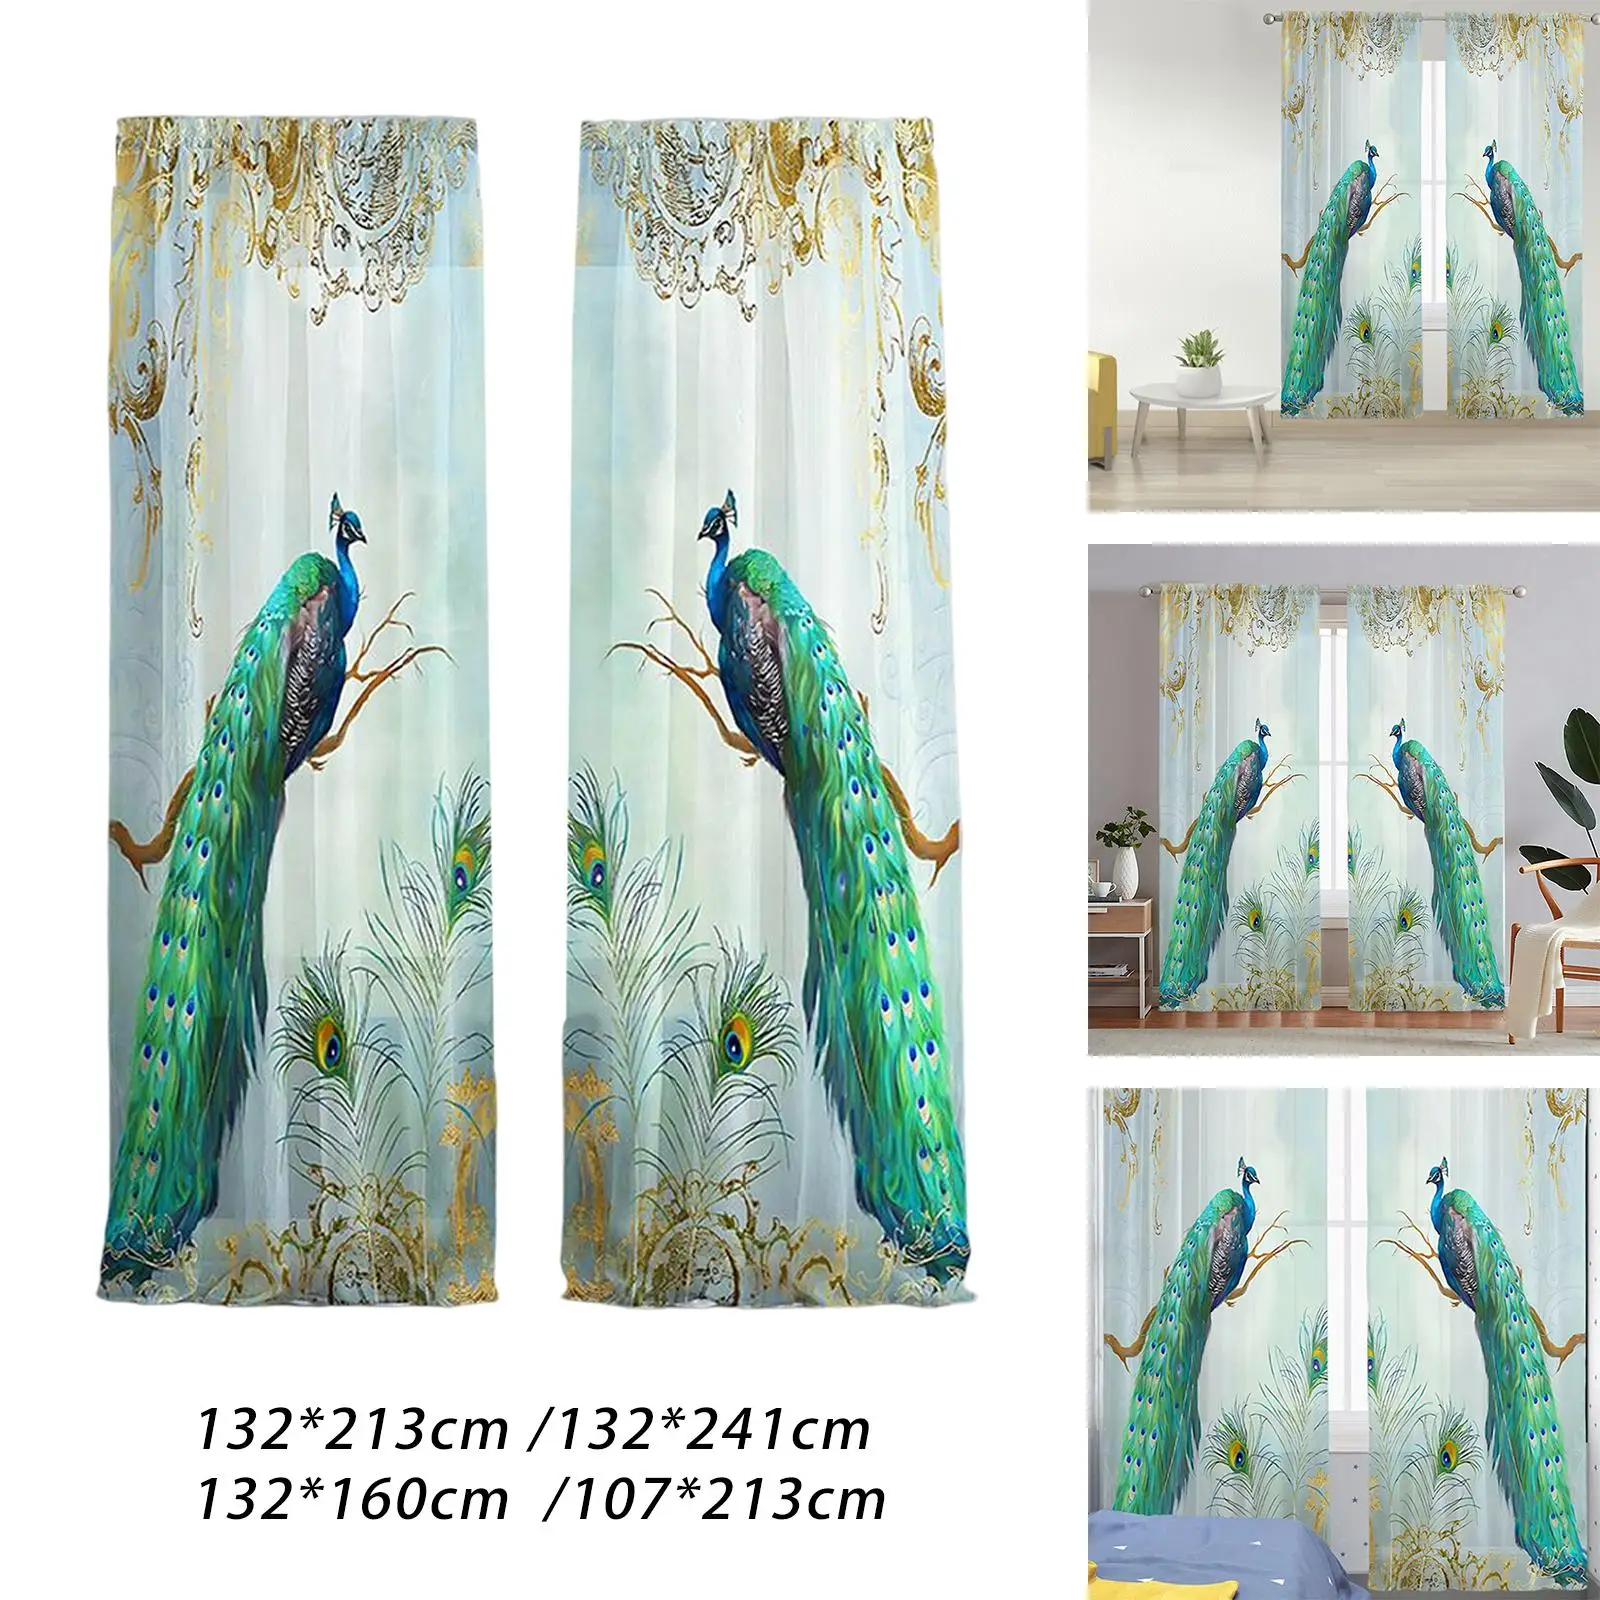 2x Peacock Blue Tulle Curtains Window Treatment Drapes for Dining Room Window Bedroom